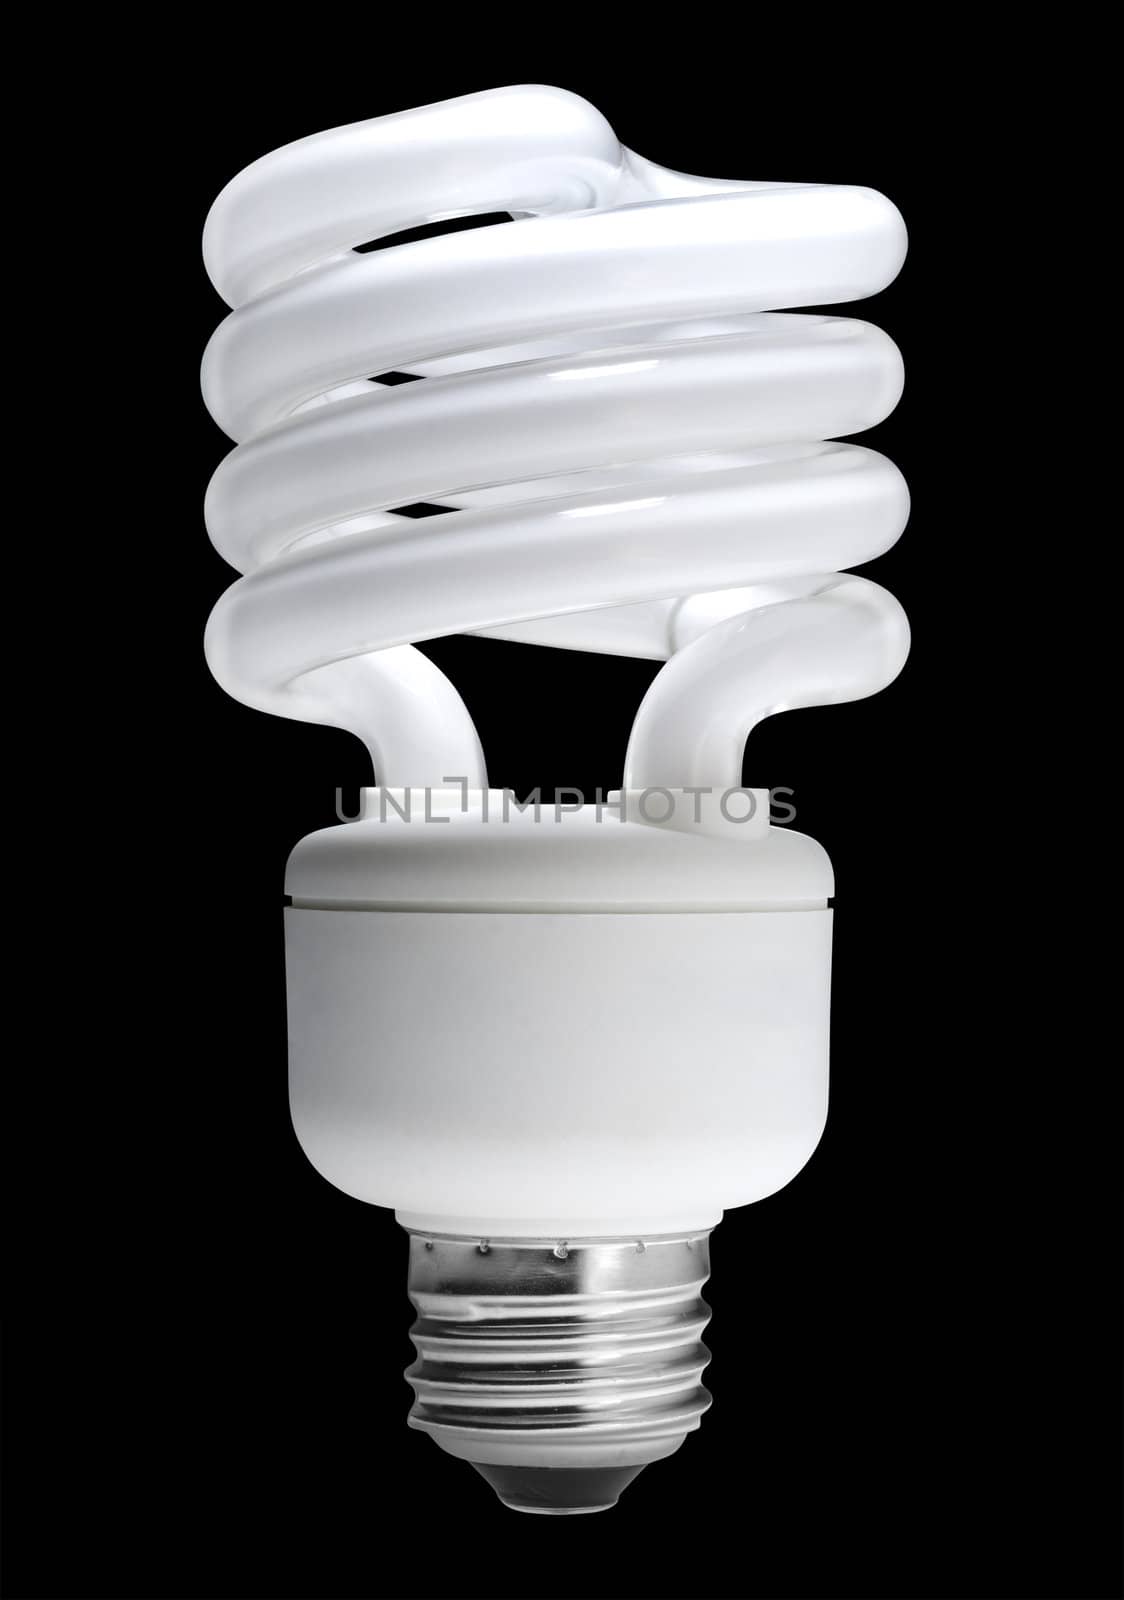 Energy saving fluorescent light bulb, isolated with clipping path